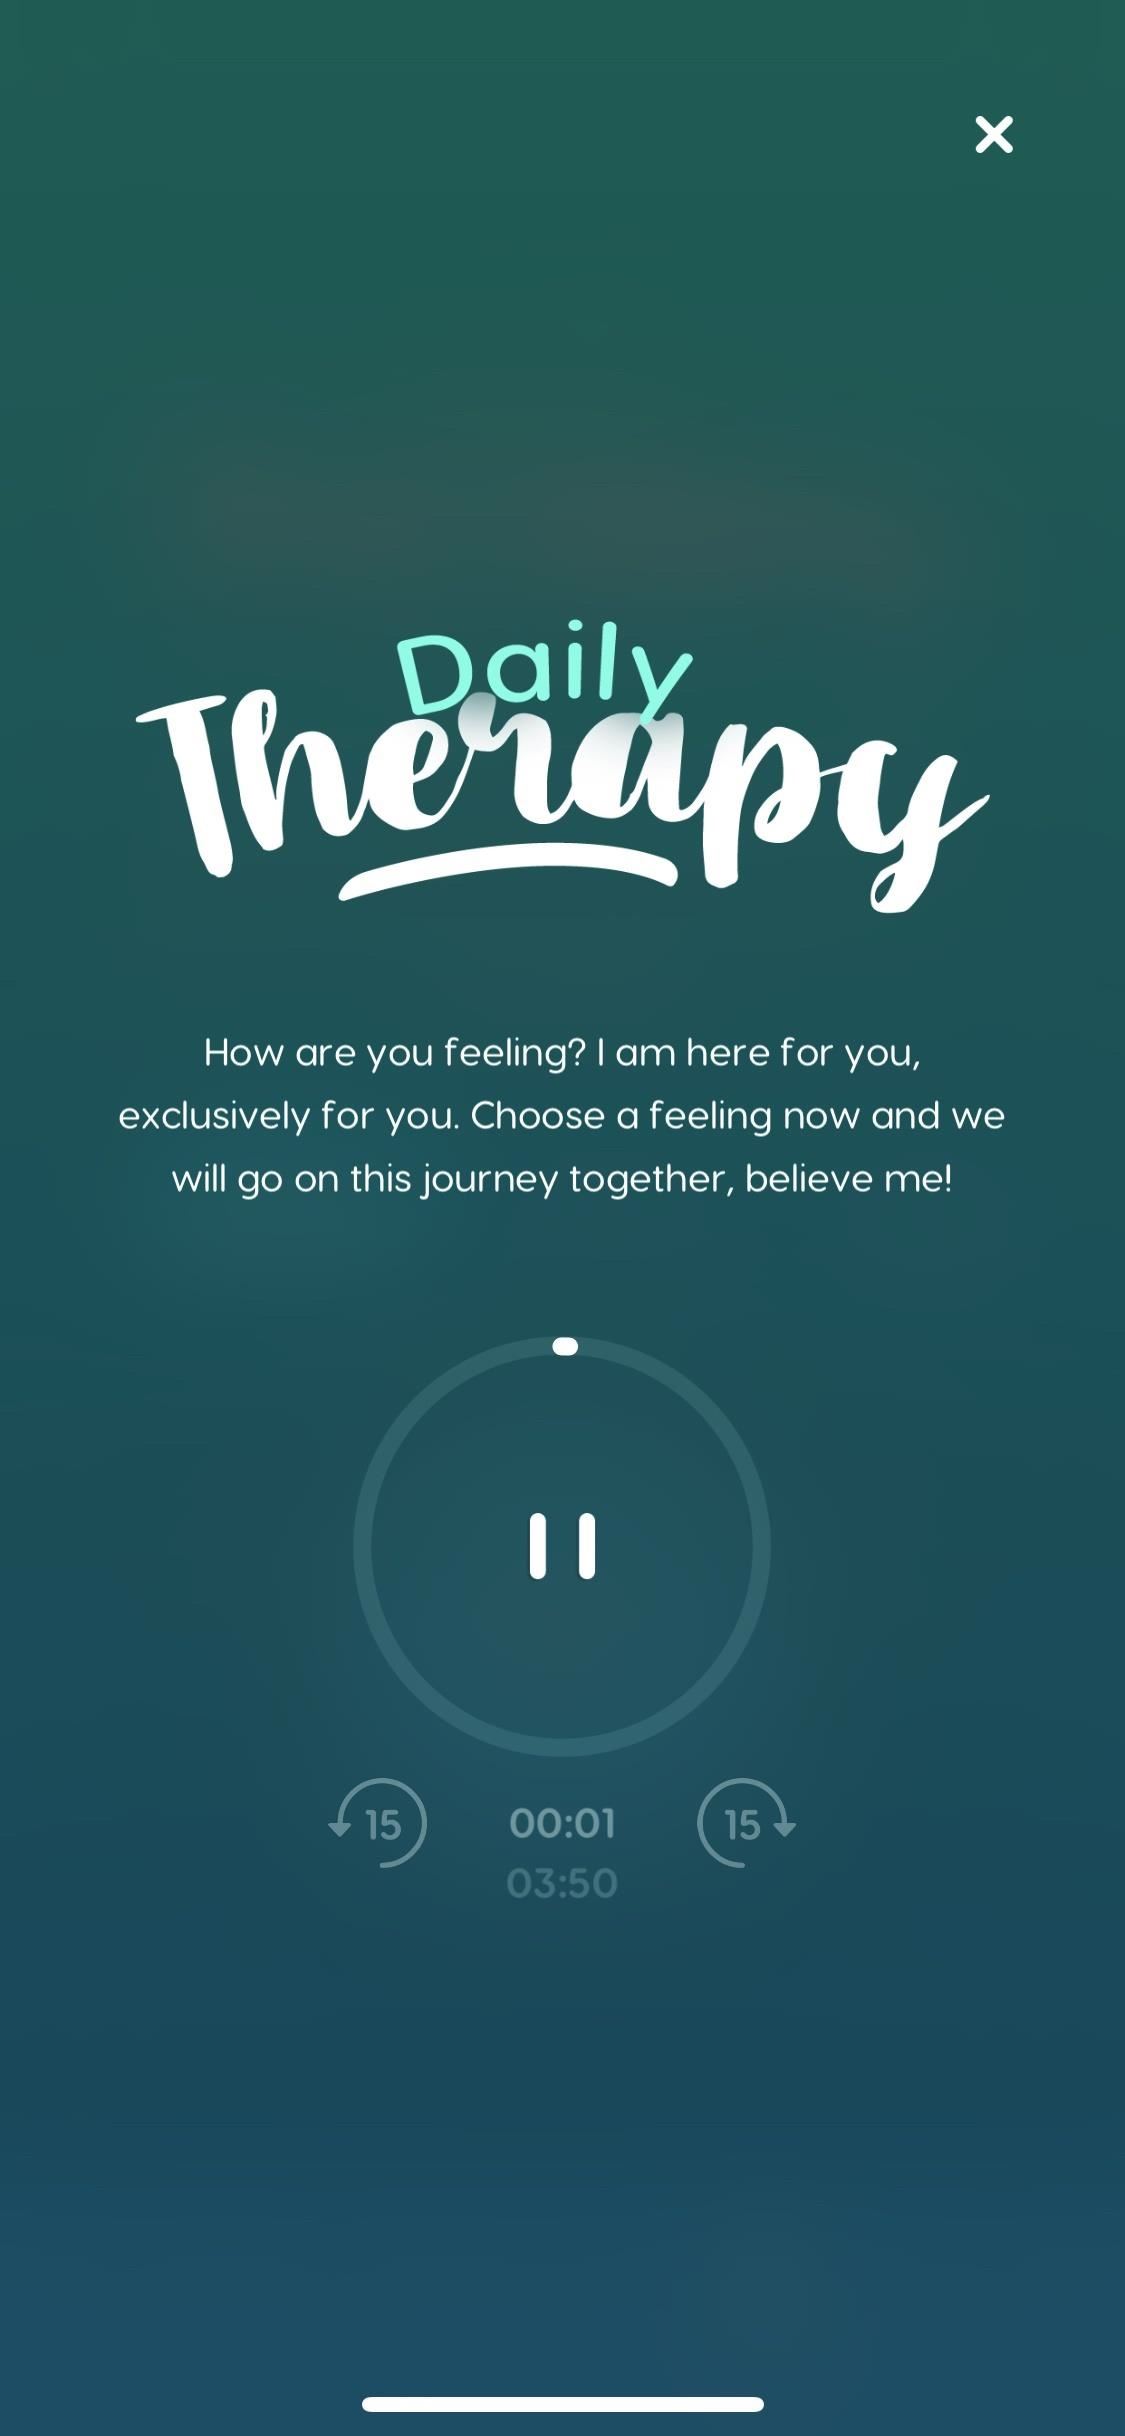 Ease Your Coronavirus Worries with These Meditation Apps